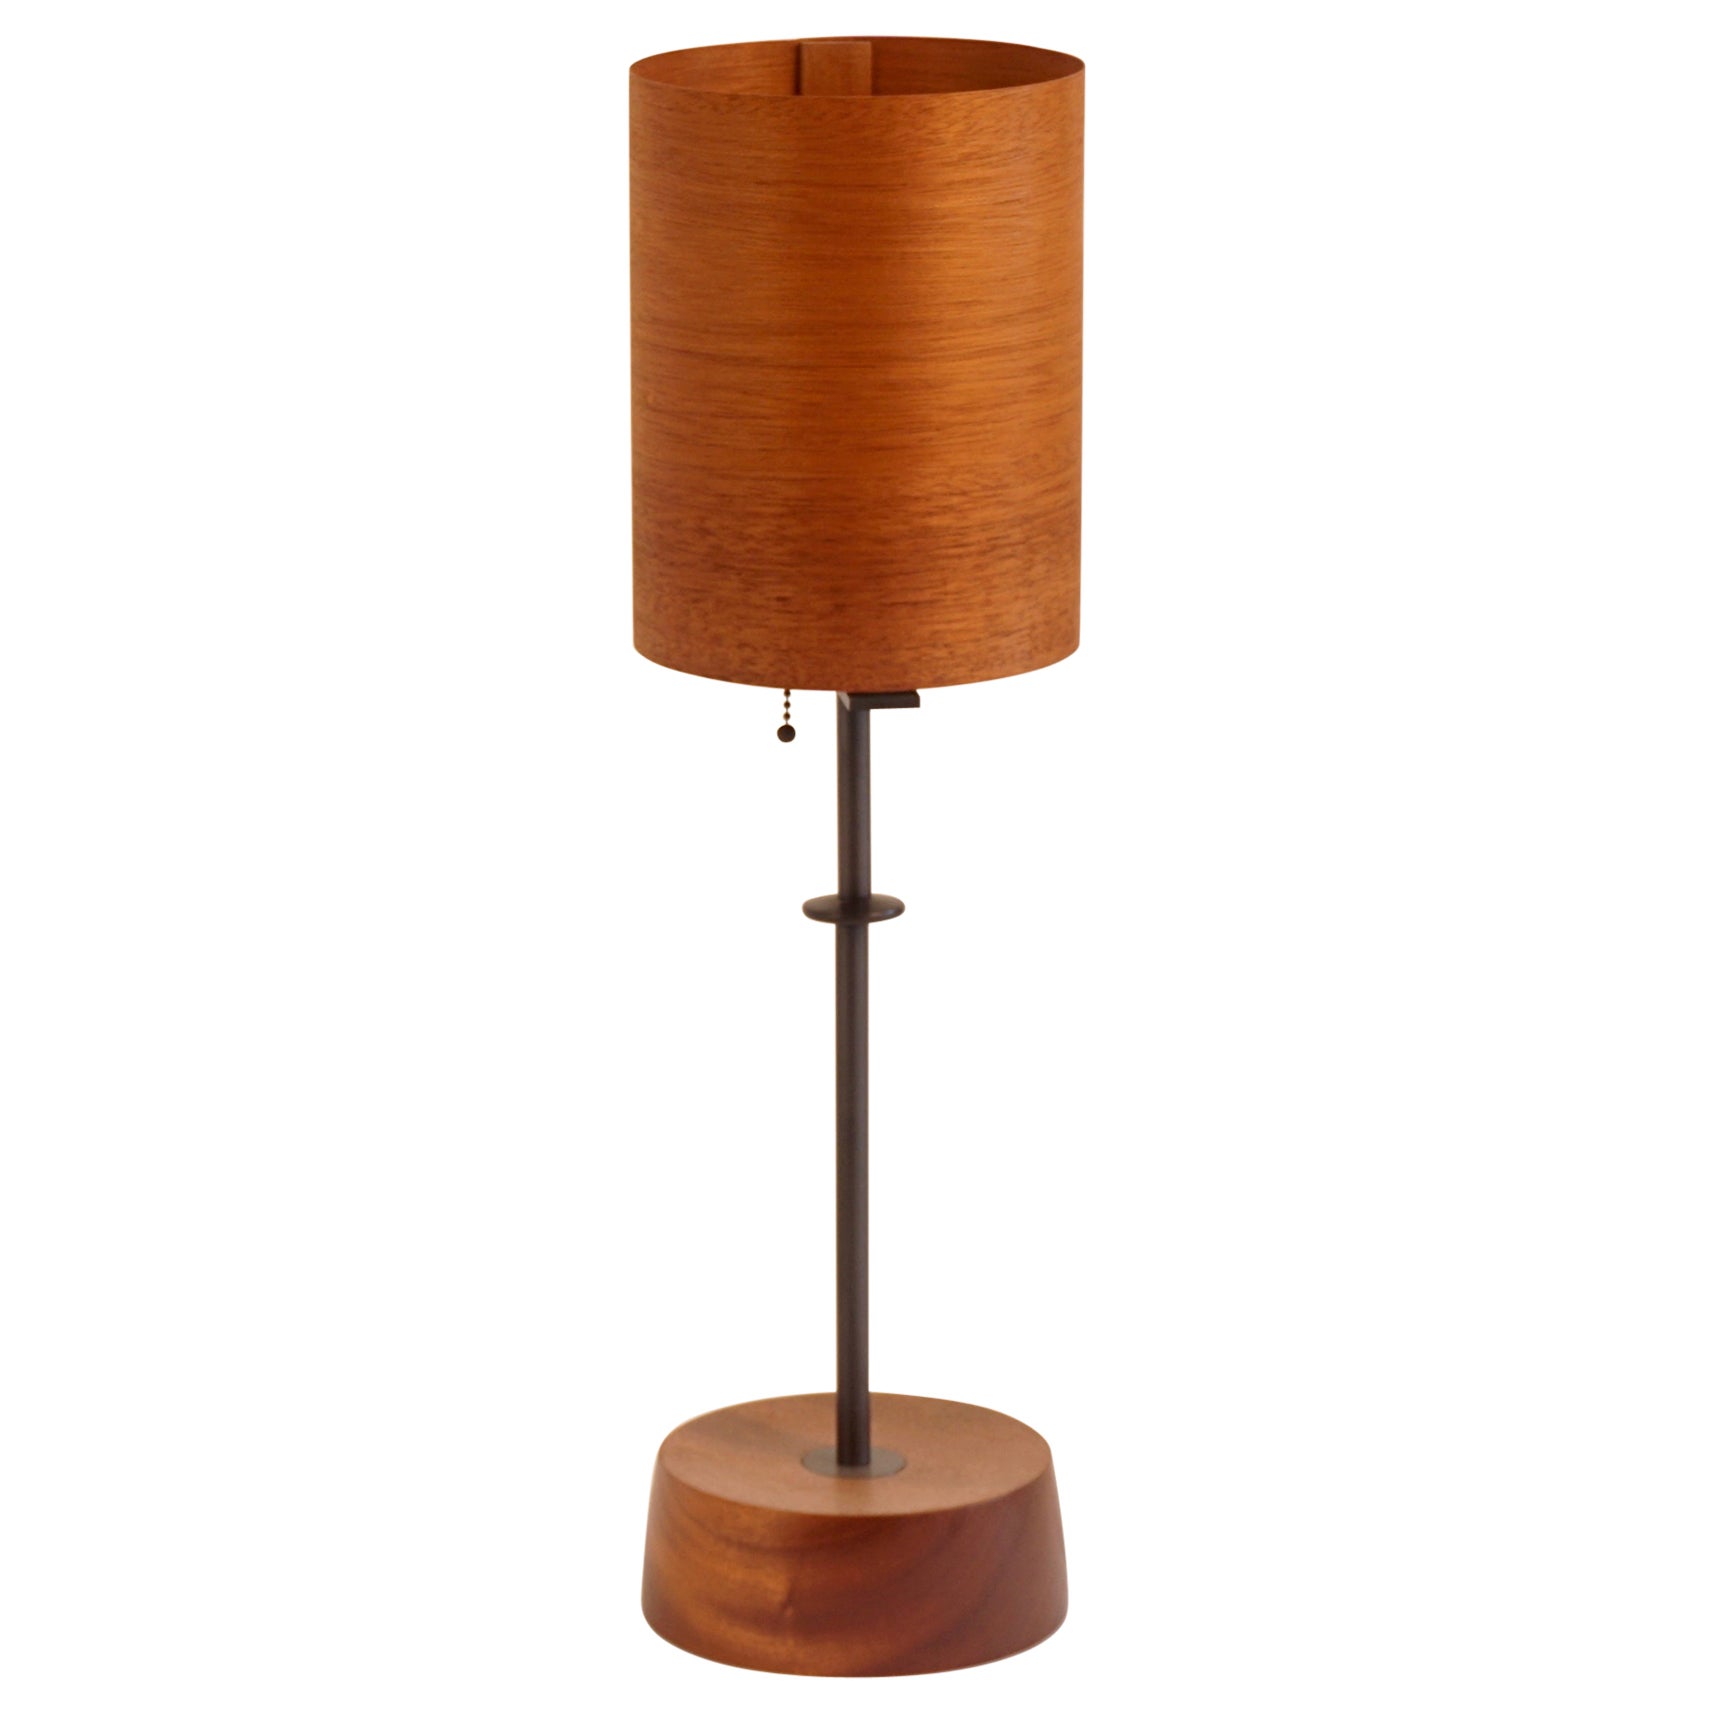 Mahogany Wood Veneer Table Lamp #2 with Blackened Bronze Frame For Sale